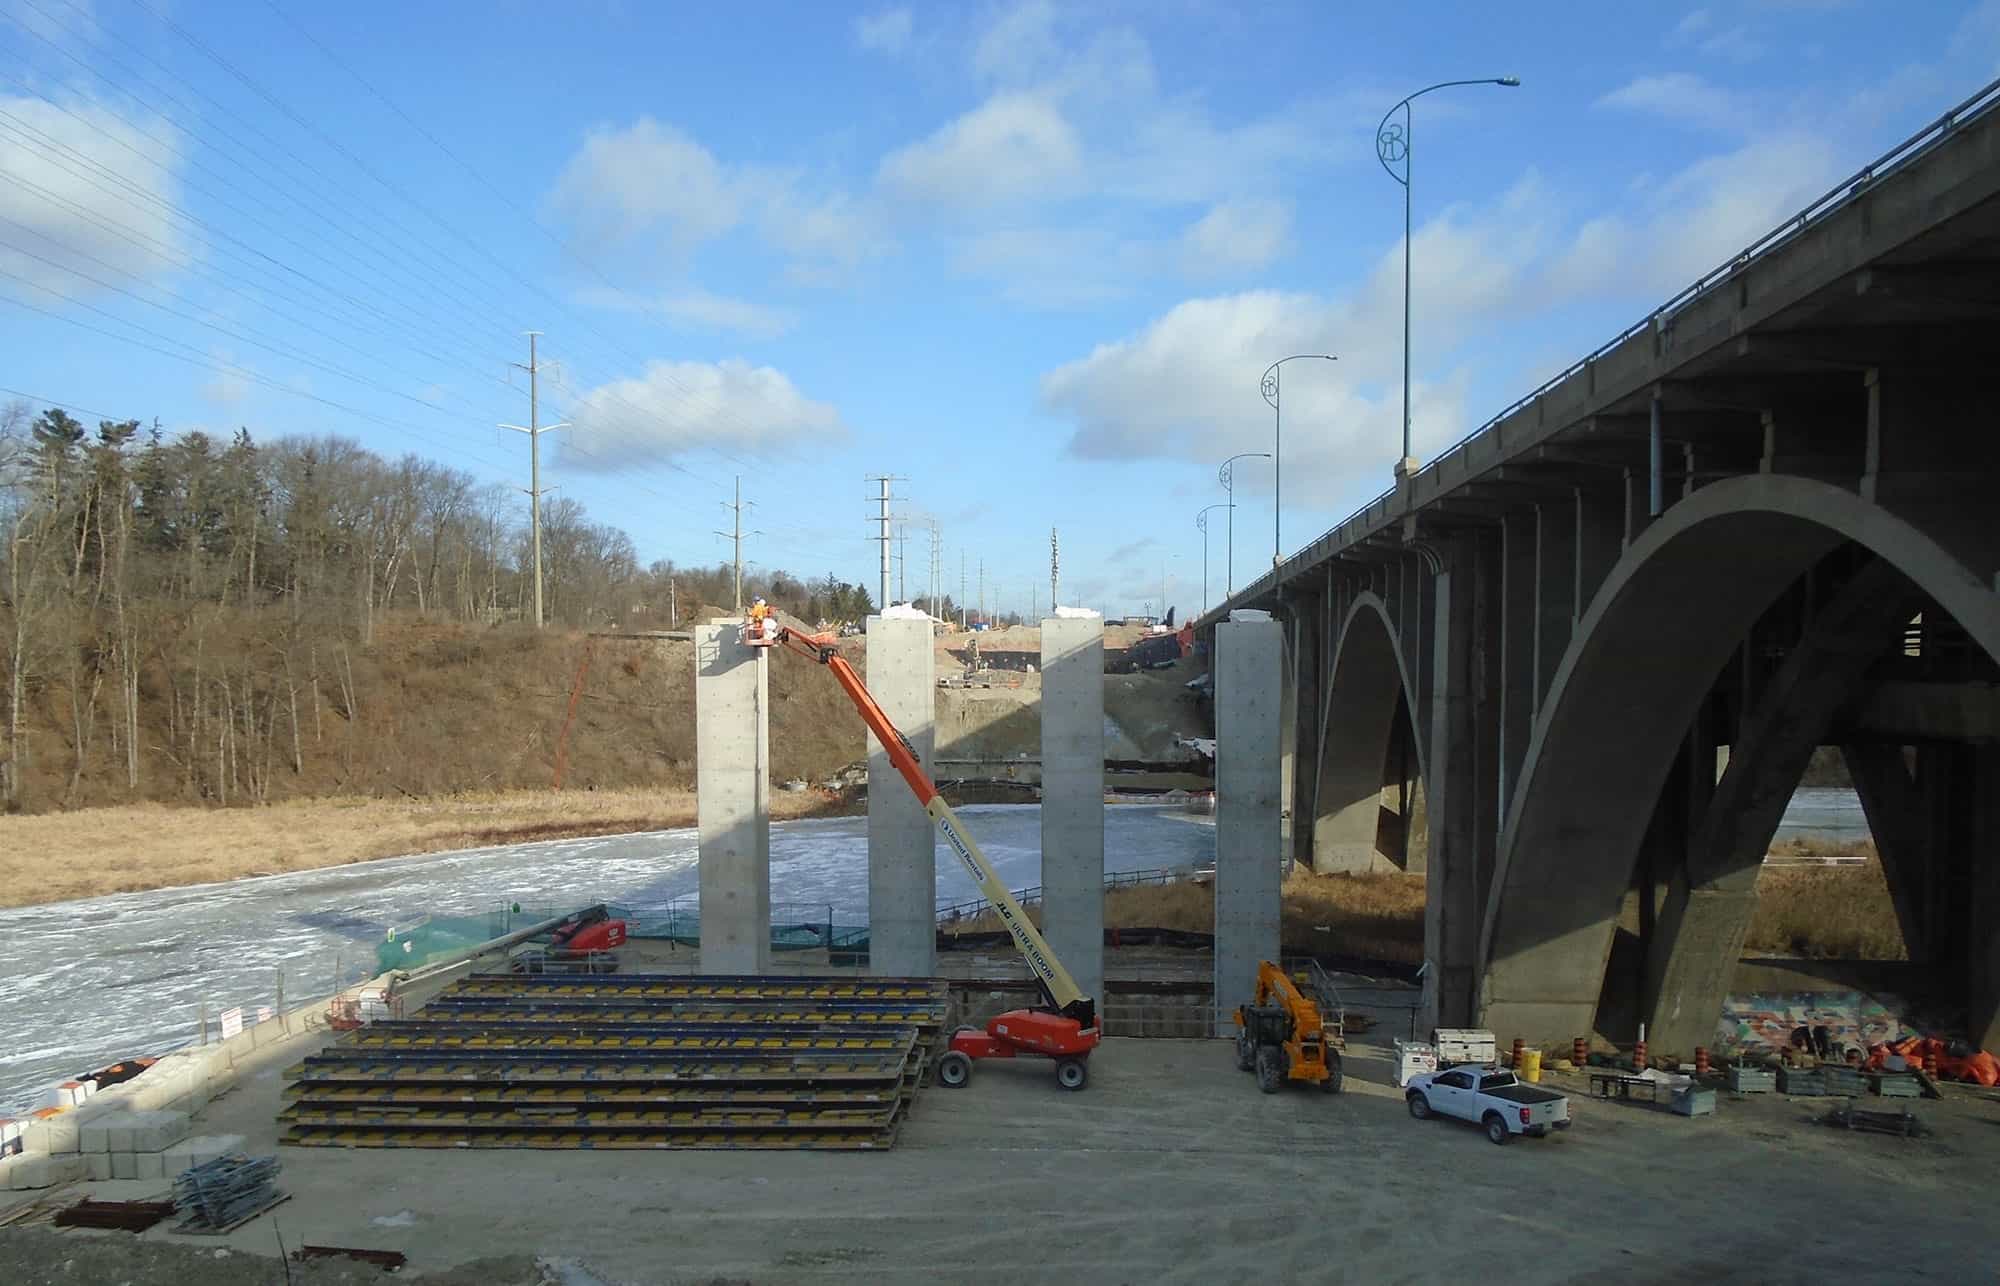 VIDEO: A recent bird's-eye view of work on the QEW bridge over the Credit River in Mississauga